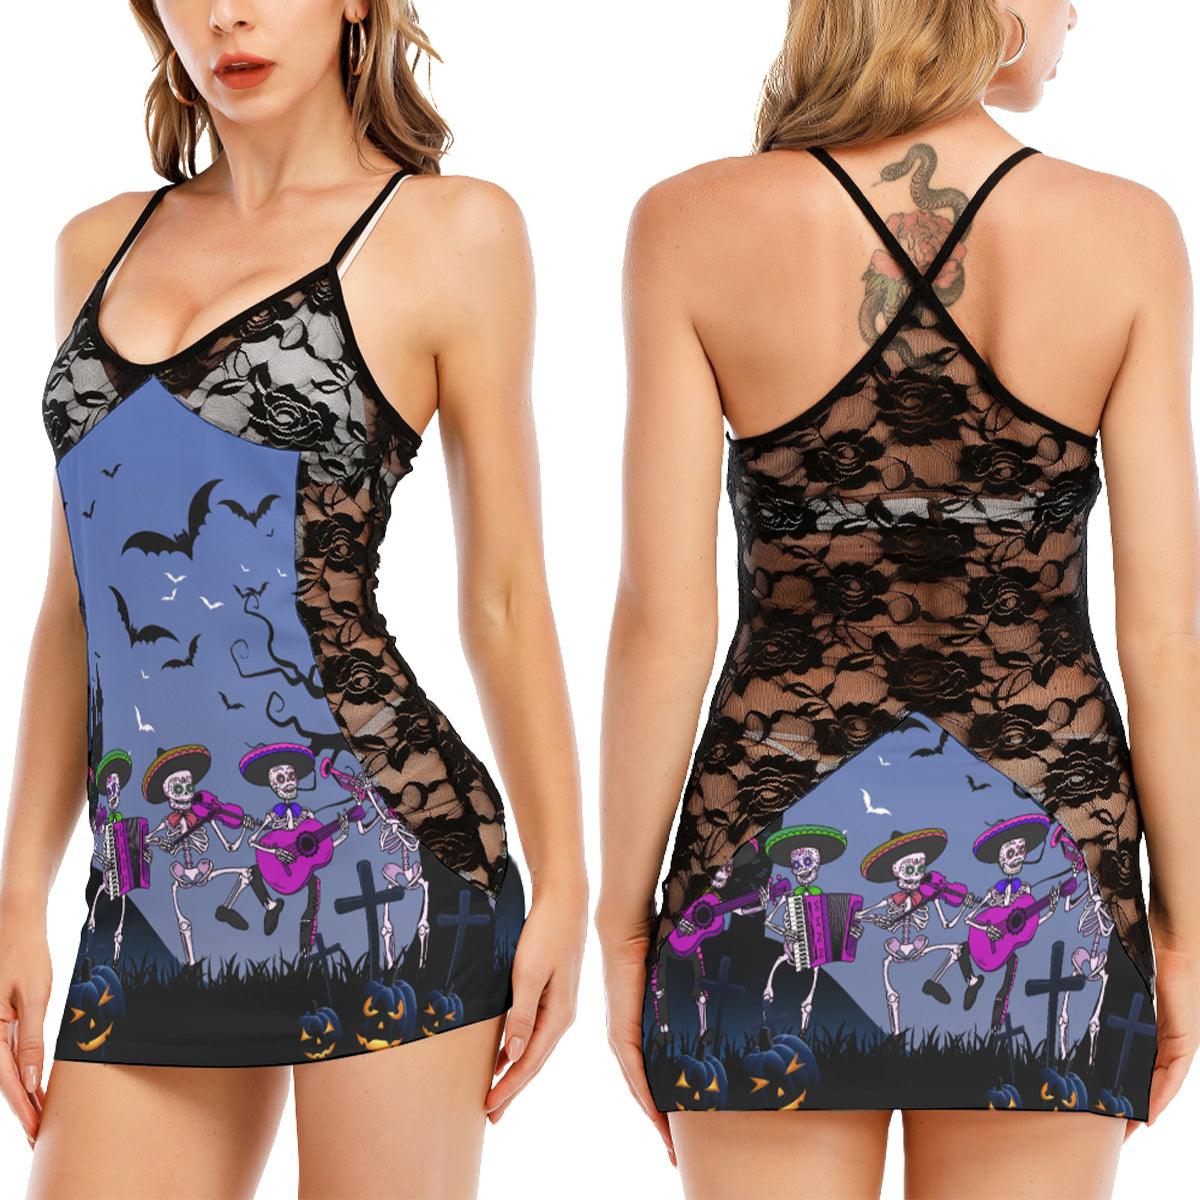 Mexico Skull Band All-Over Print Women Black Lace Cami Dress, Sexy Nightwear For Women - Wonder Skull